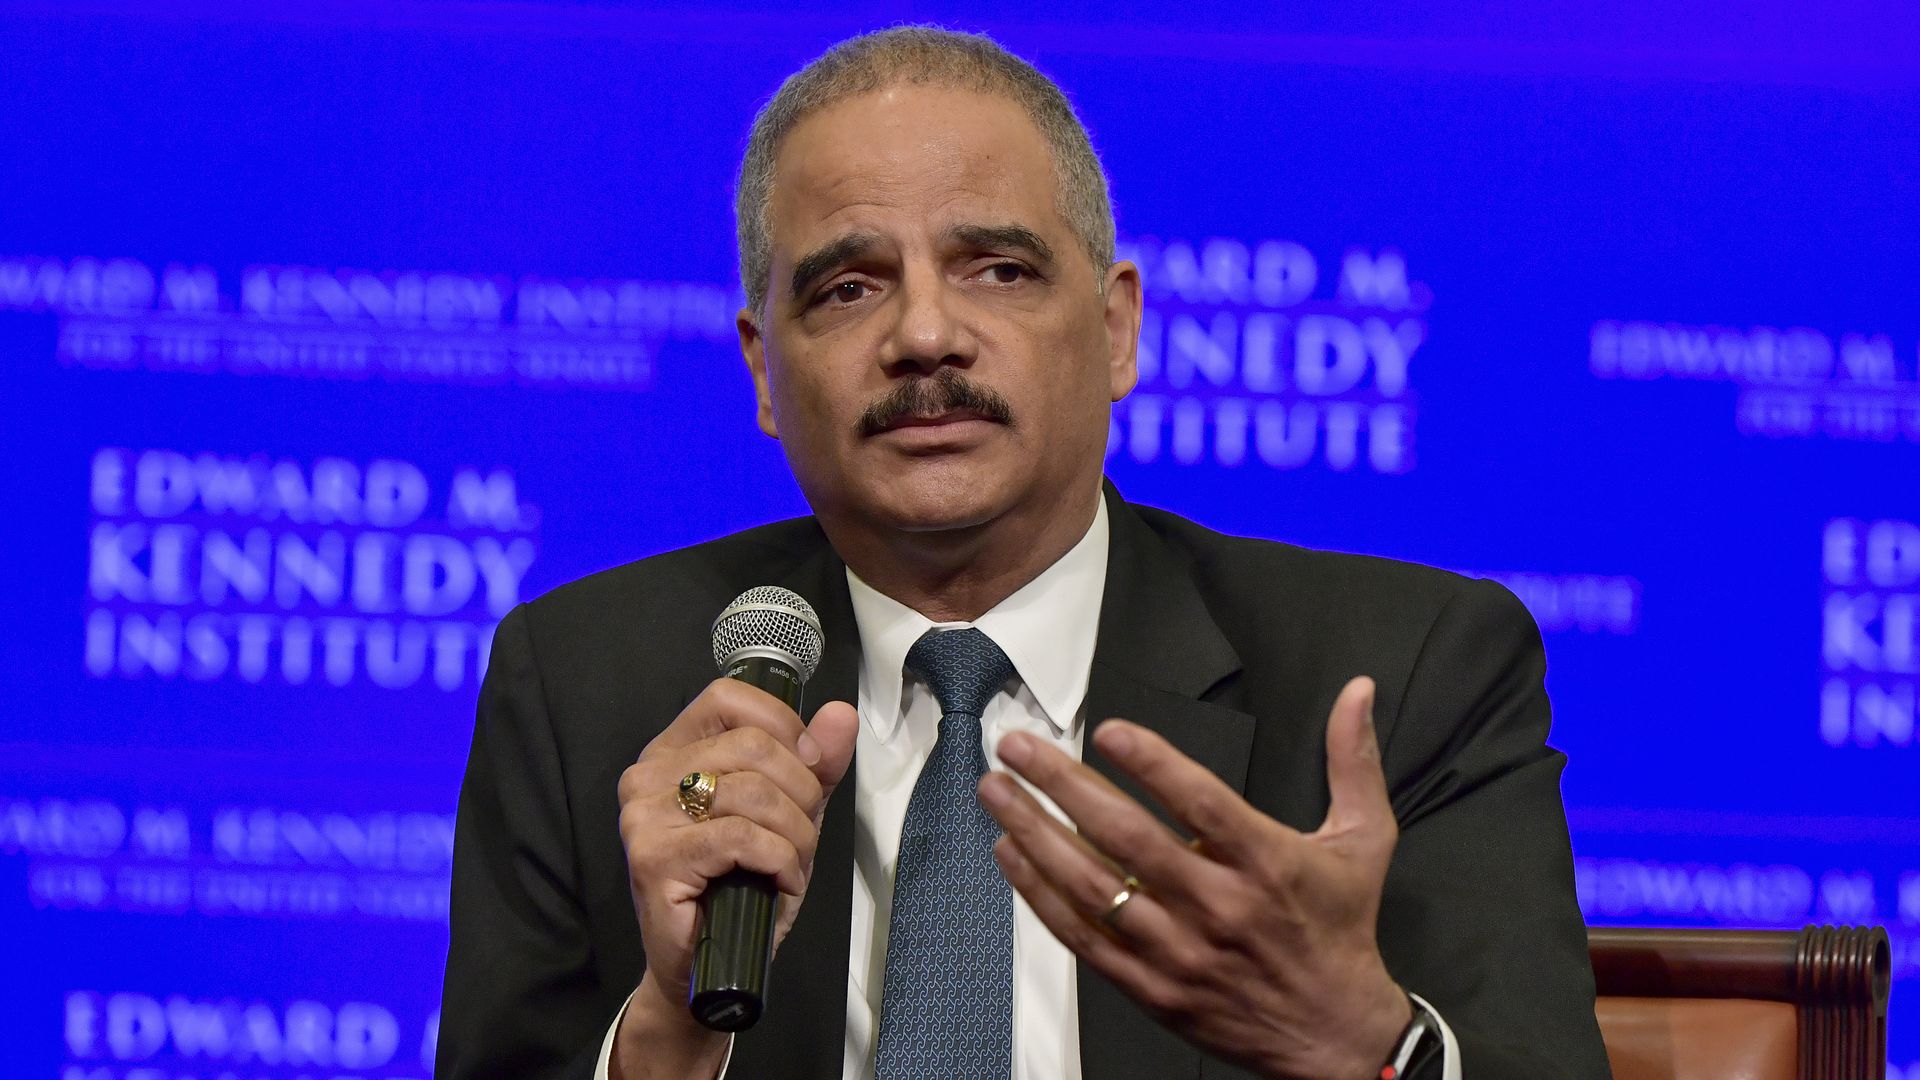 Eric Holder holding a microphone